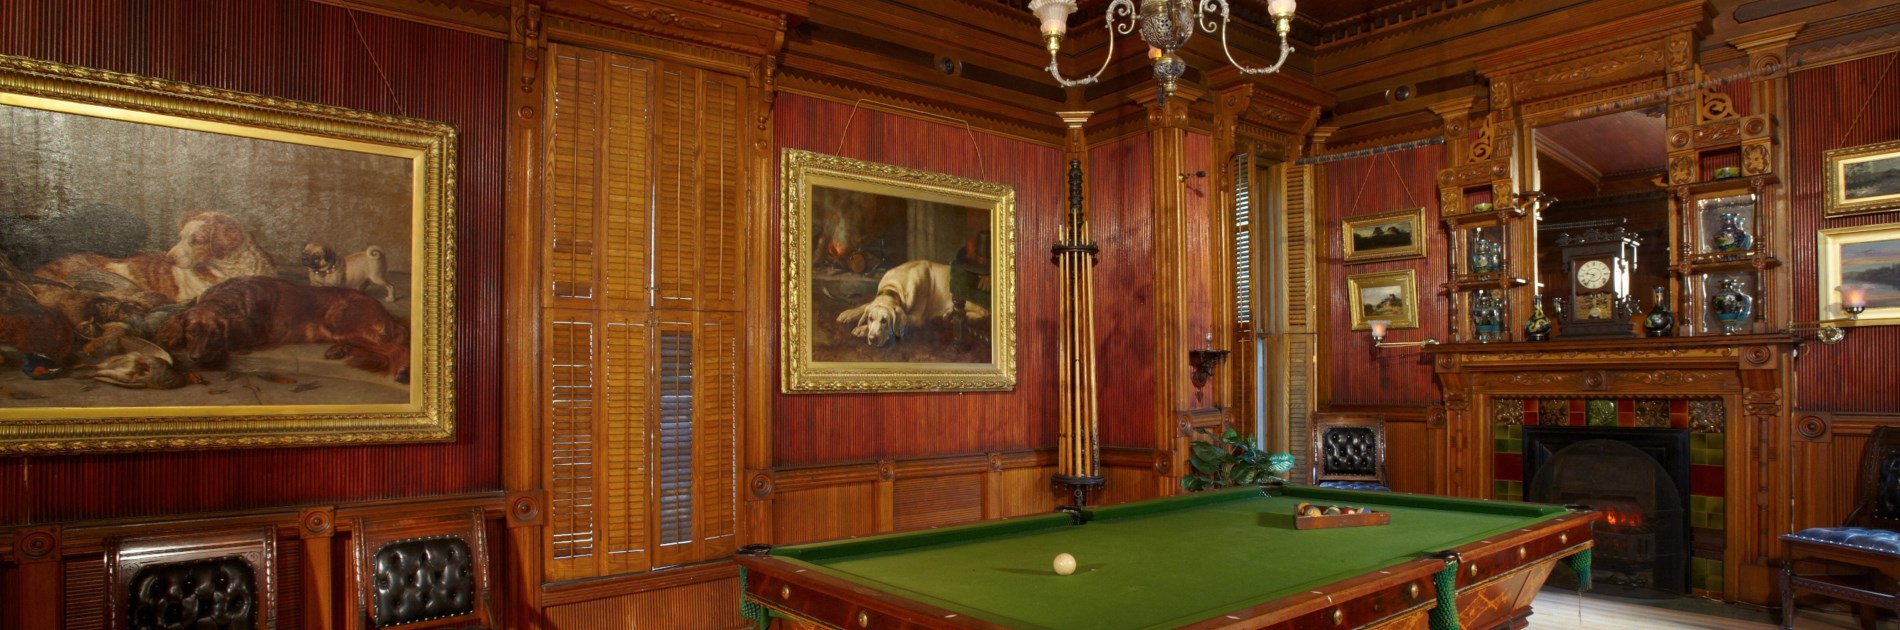 Billiard Room paintings of golden lab and hunting dogs